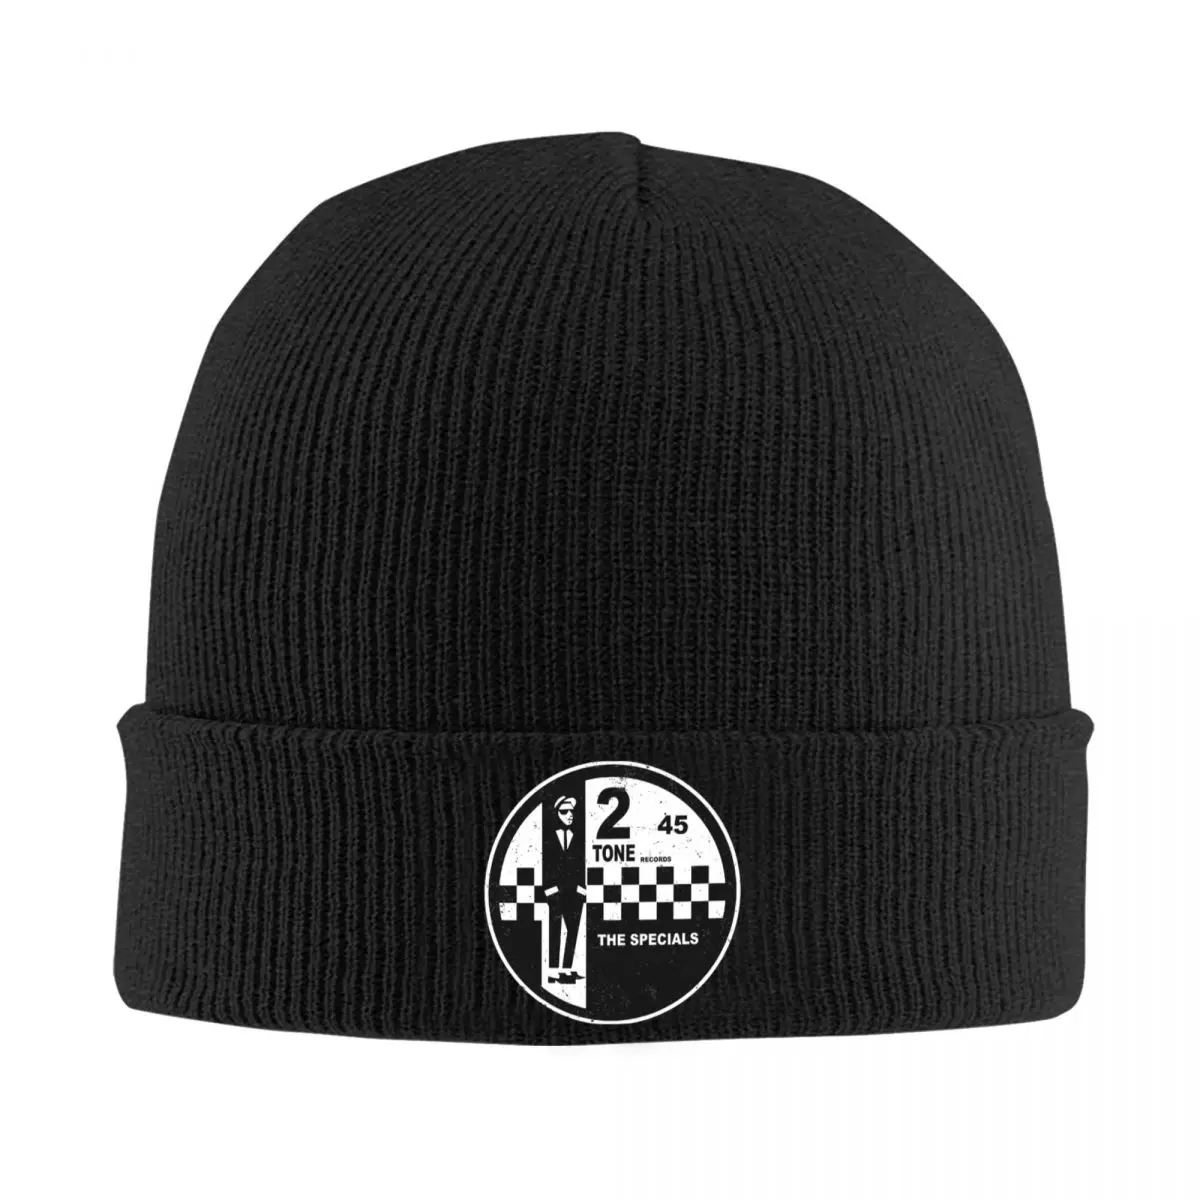 

2 Tone Records The Specials Ska Revival Knitted Hat Beanie Winter Hat Warm Punk Two Tone 2Tone Ska-rock Cap for Men Women Gifts